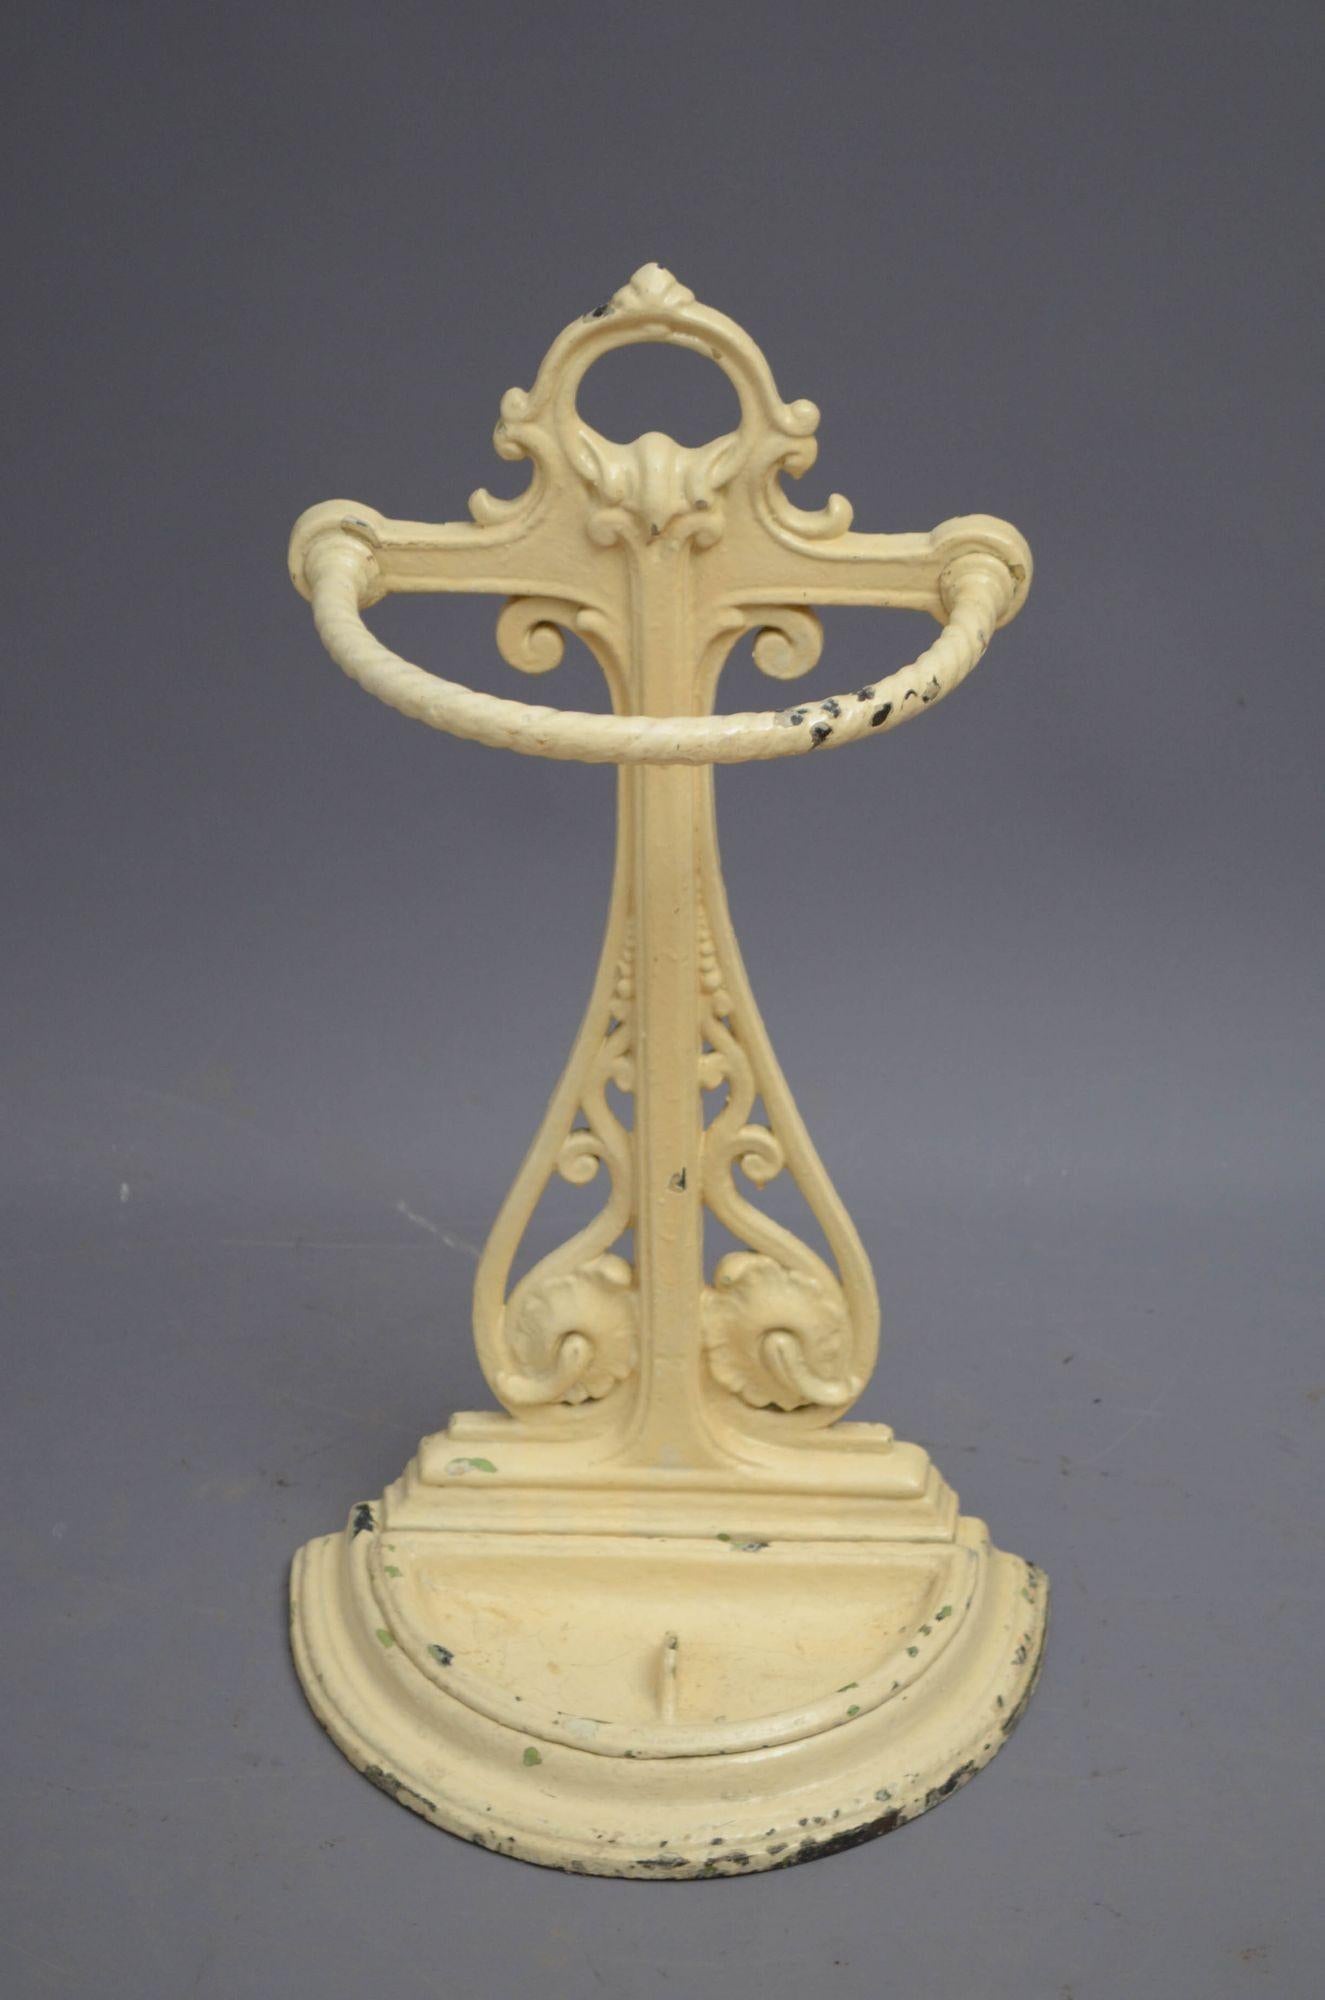 Sn4877 Victorian cast iron umbrella stand of pierced and scrolled design with demi lune umbrella holder and removable drip tray, all in home ready condition. c1880
H25